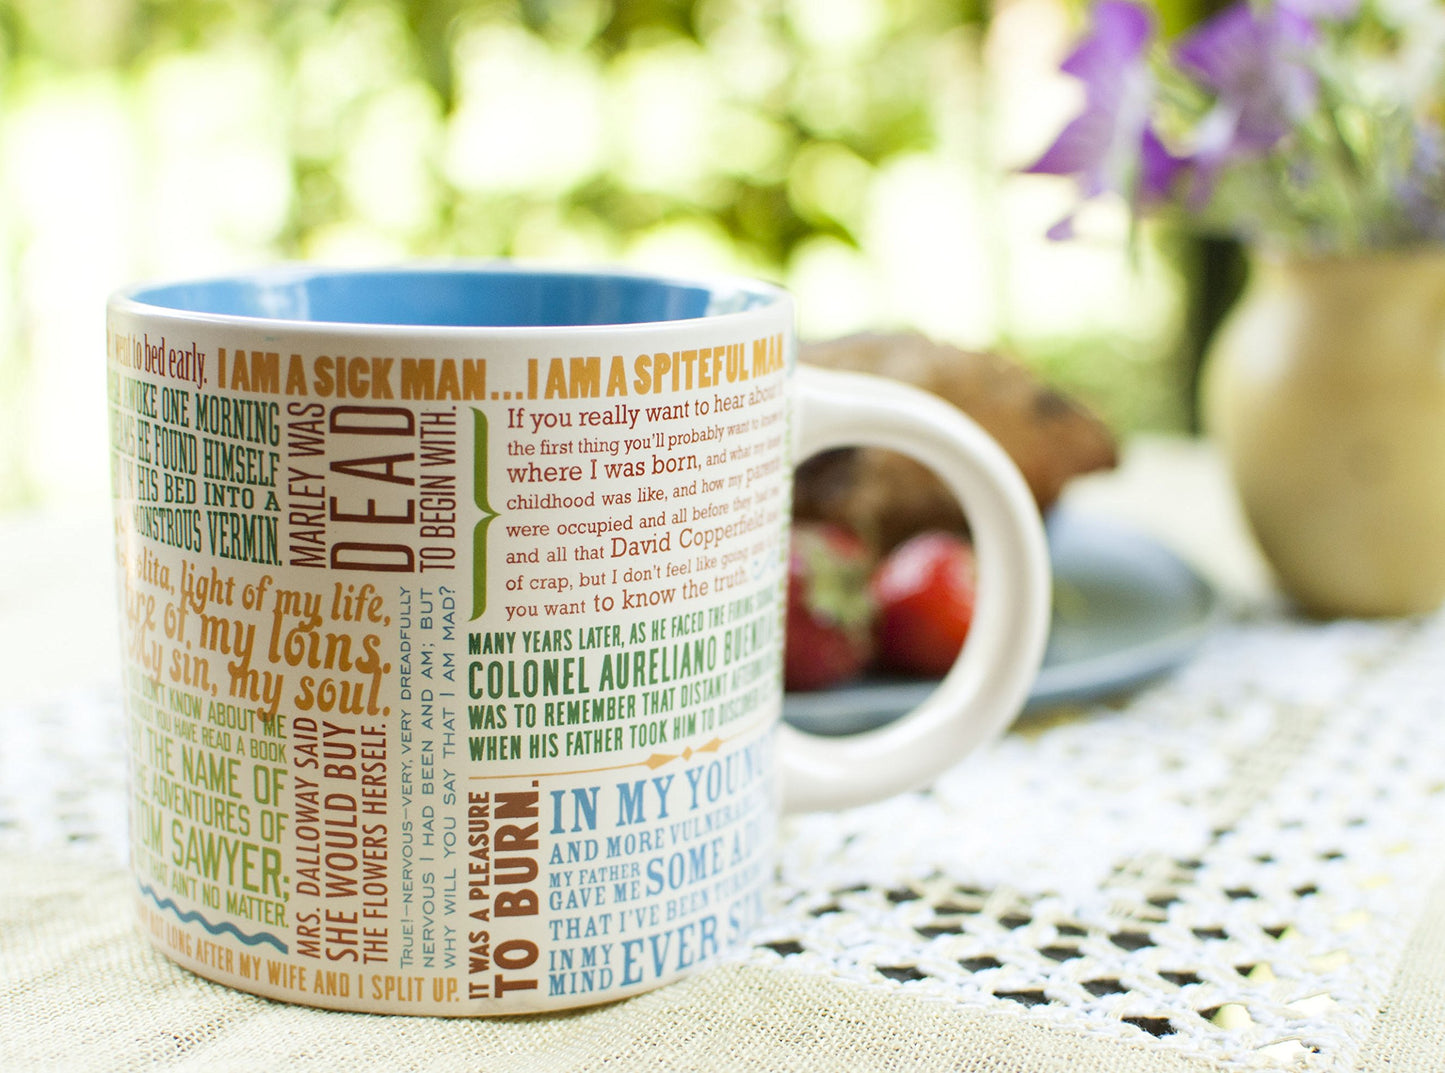 The Unemployed Philosophers Guild First Lines of Literature Coffee Mug - Famous Openings from Books, Novellas, and Short-Stories, Comes in a Box, 14oz